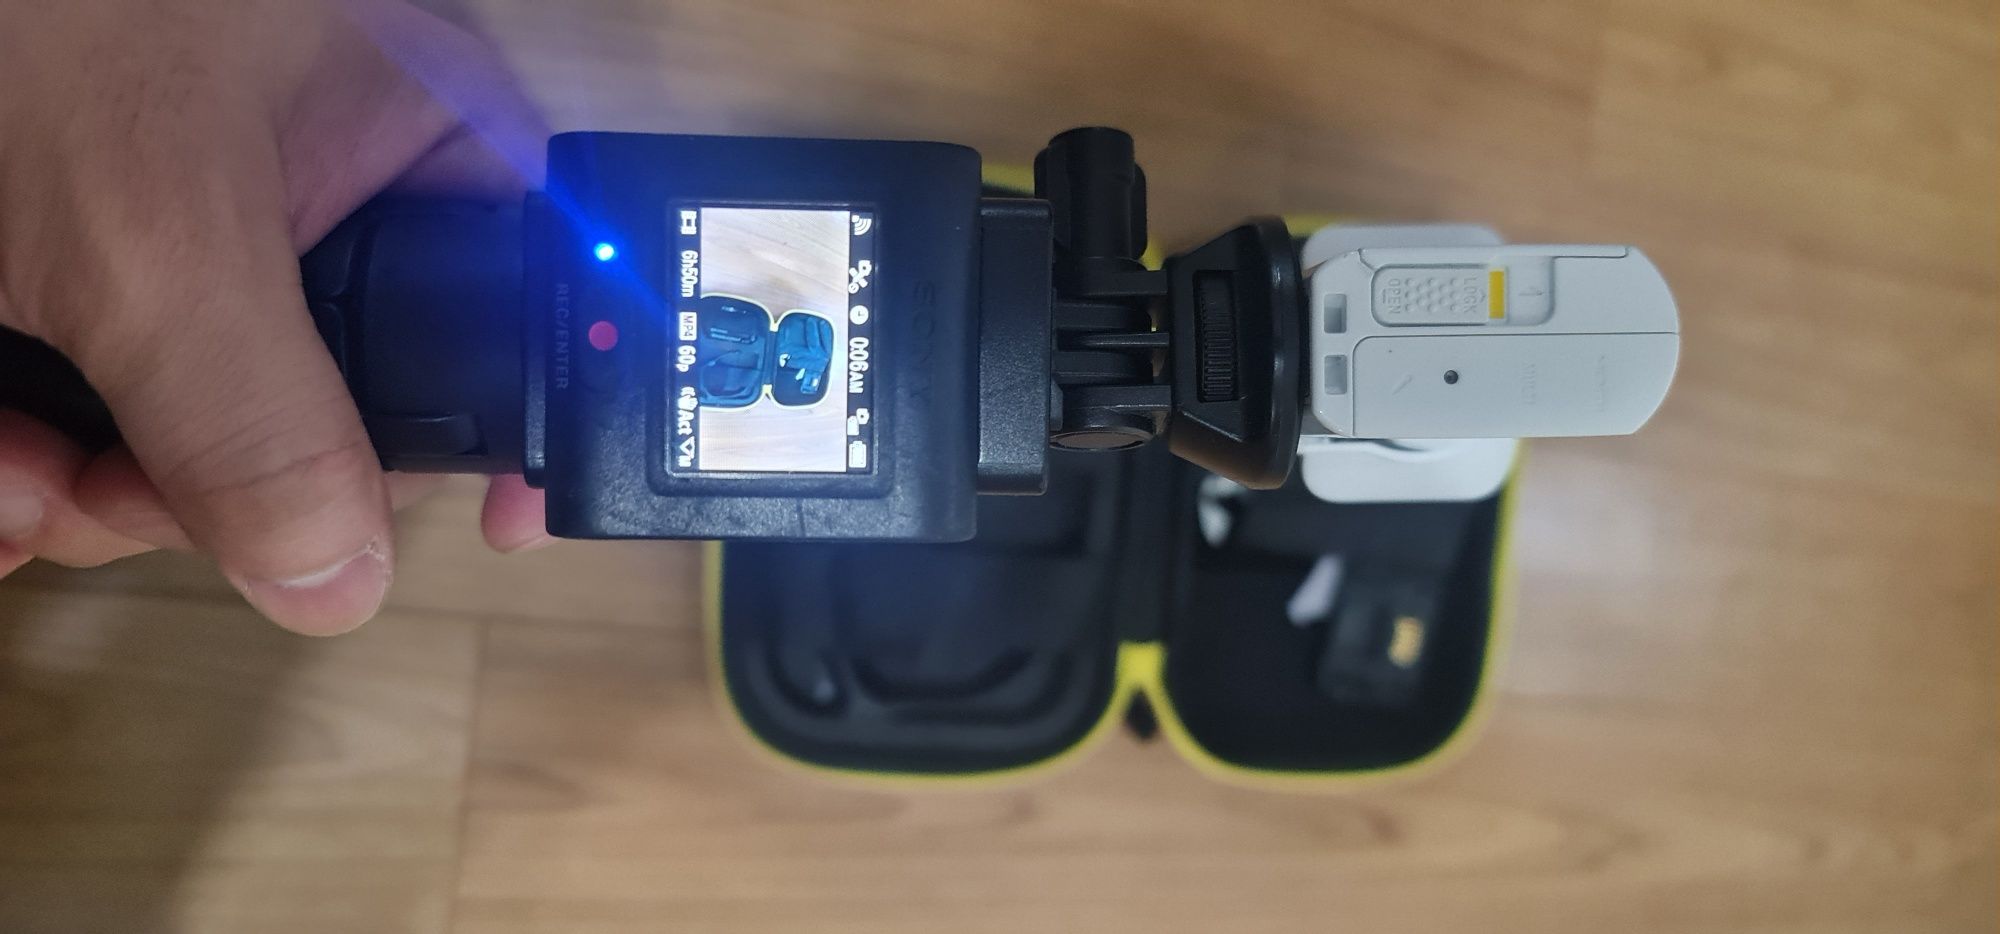 Sony action cam HDR-AS300